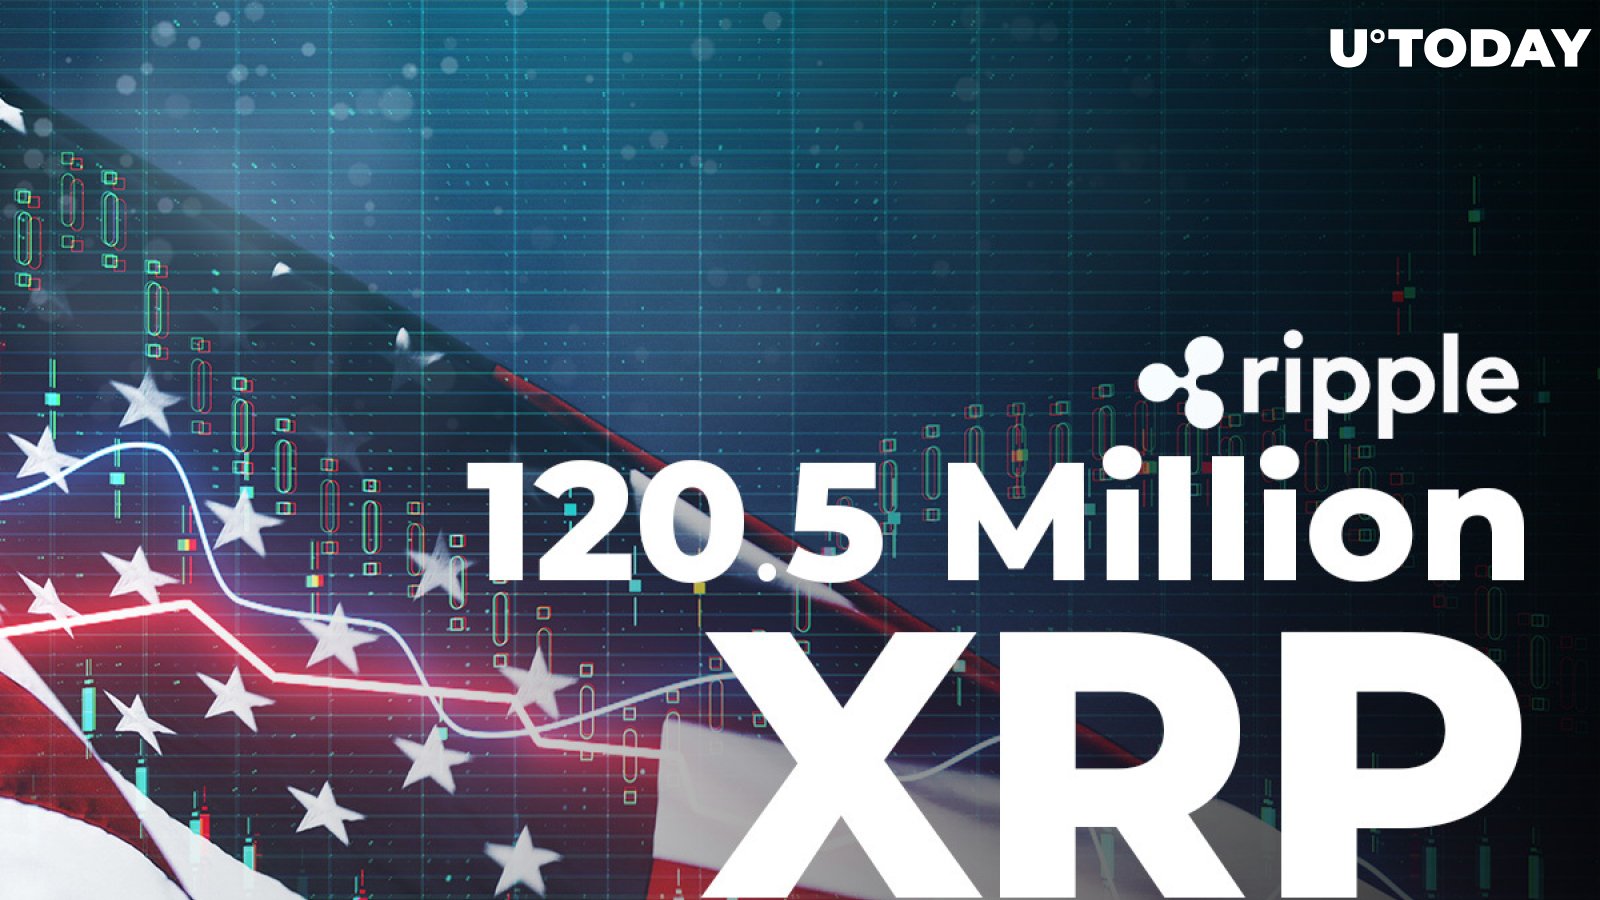 120.5 Million XRP Shifted by Ripple and Large US-Based Exchanges